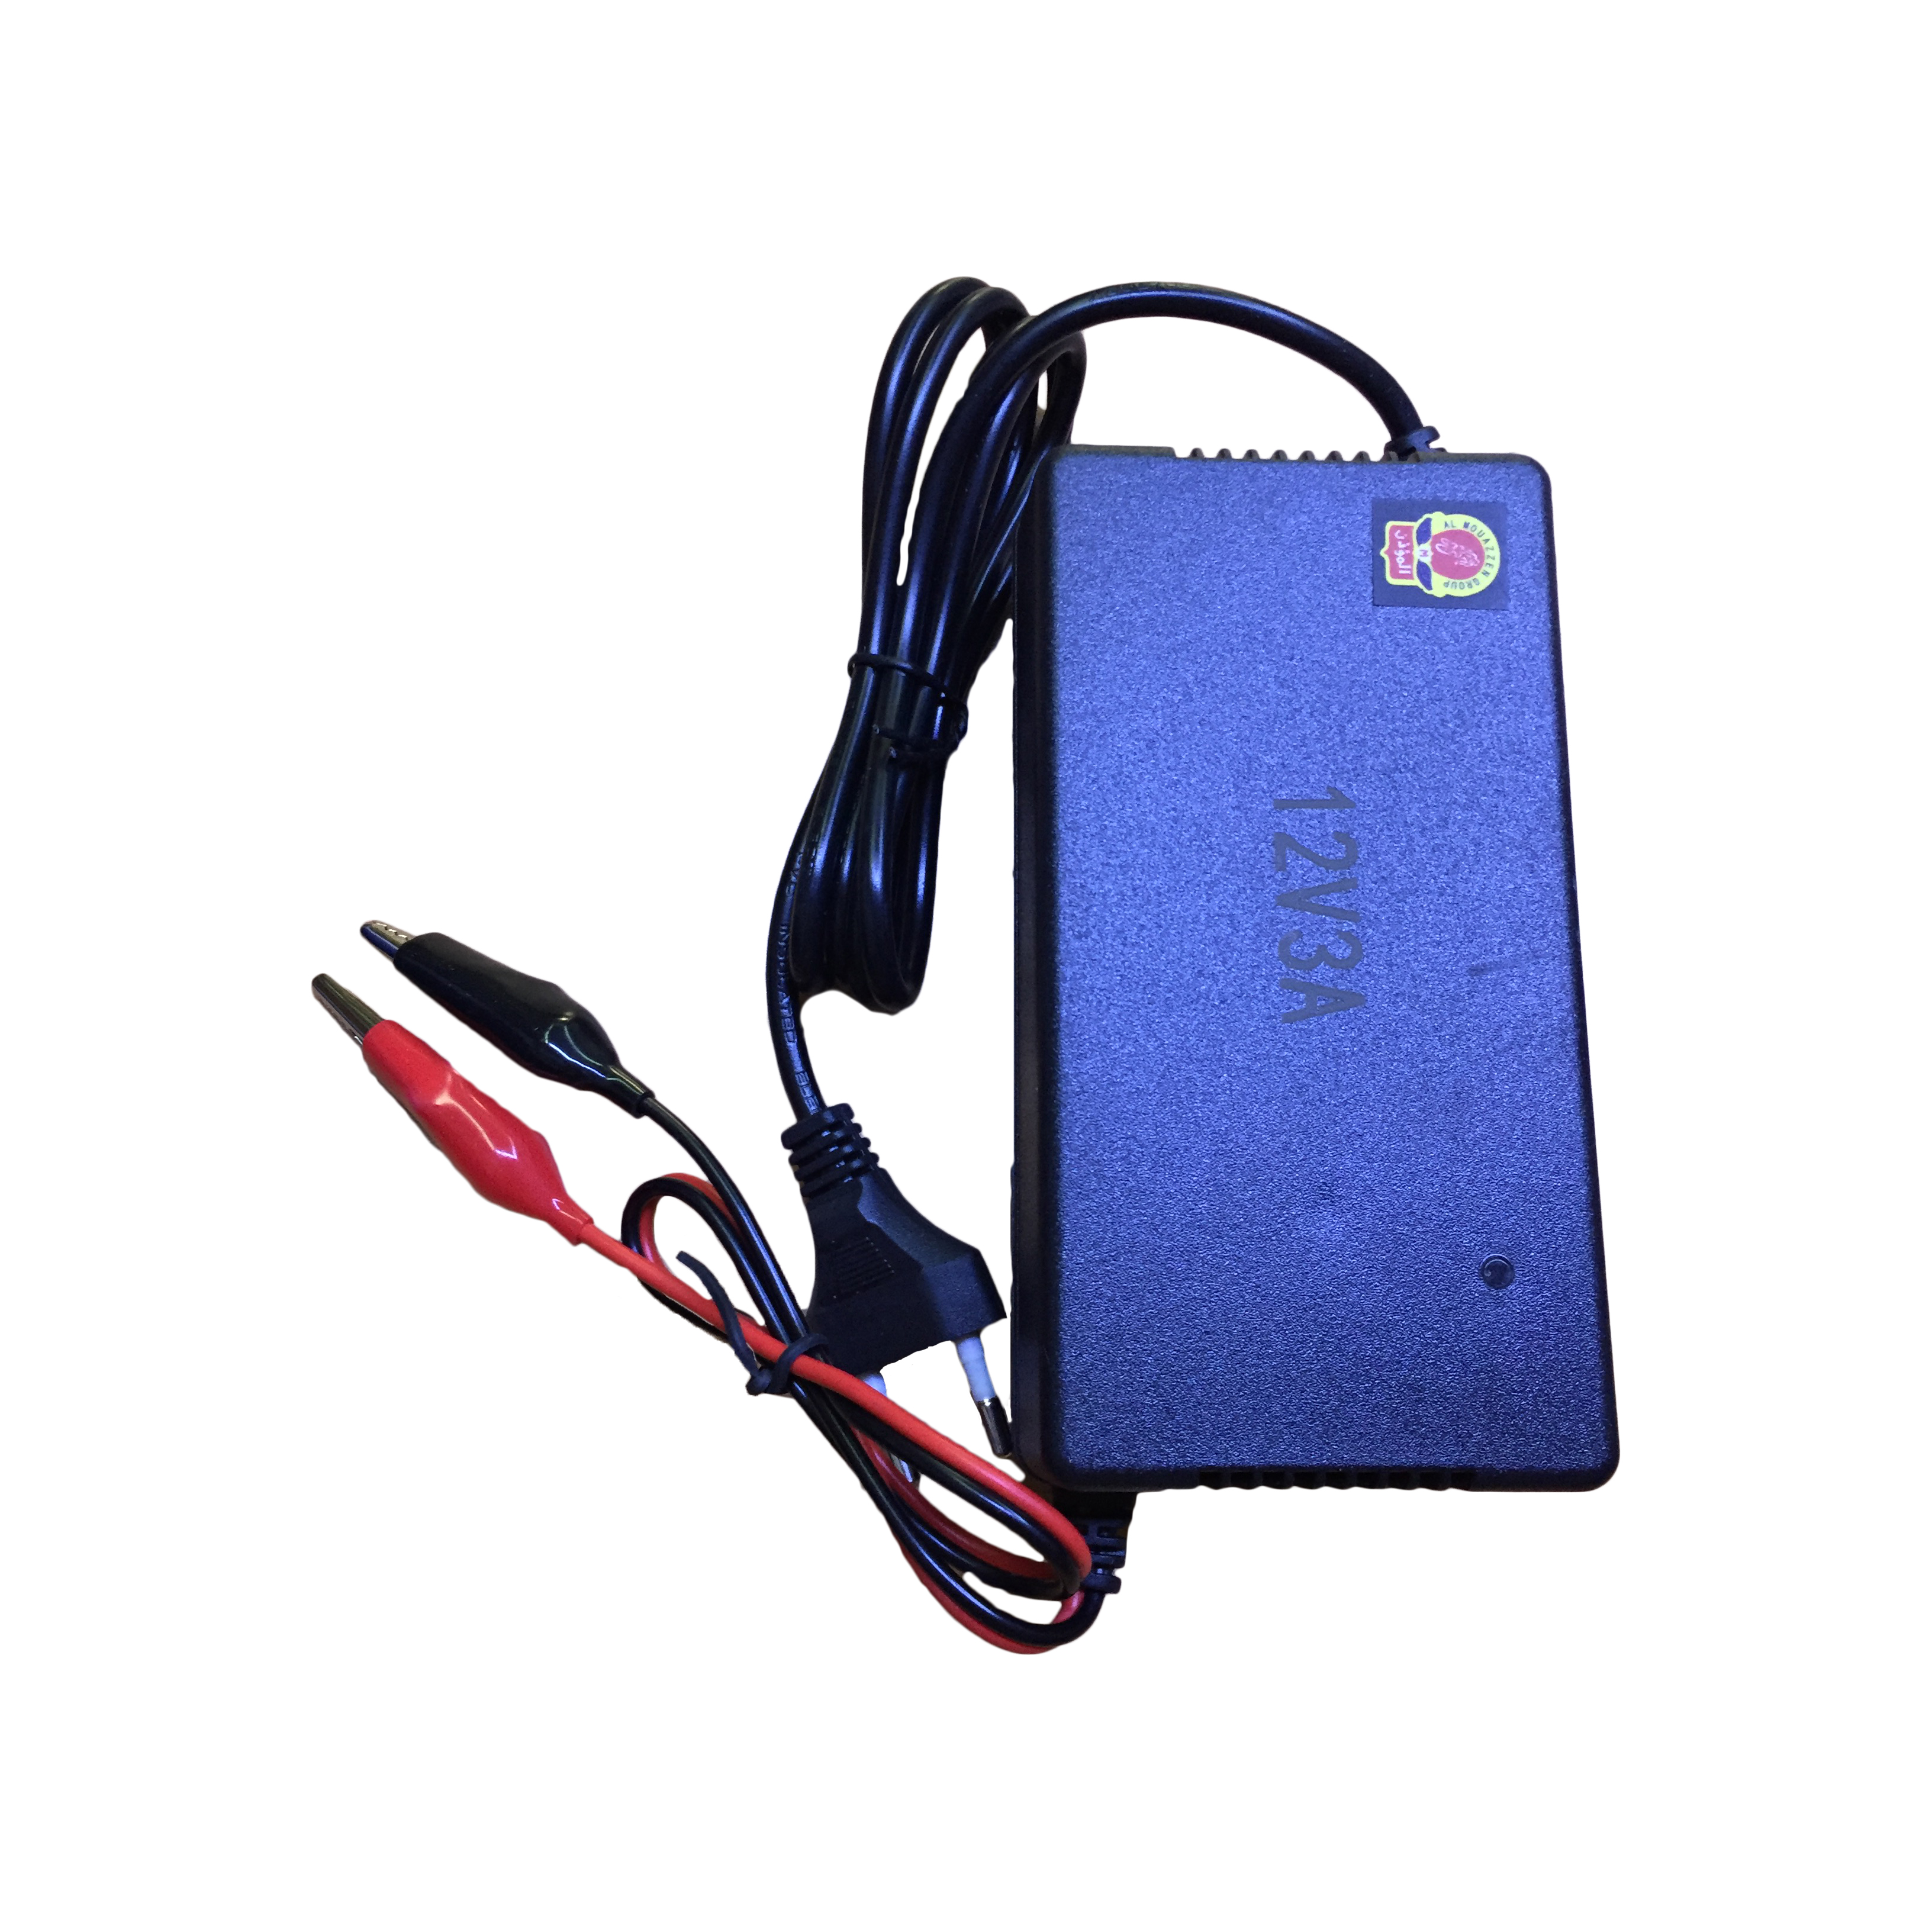 CHARGER UNIQA FOR UPS BATTERY 12V & 3A  SON-1203 شاحن المؤذن ,Battery Charger